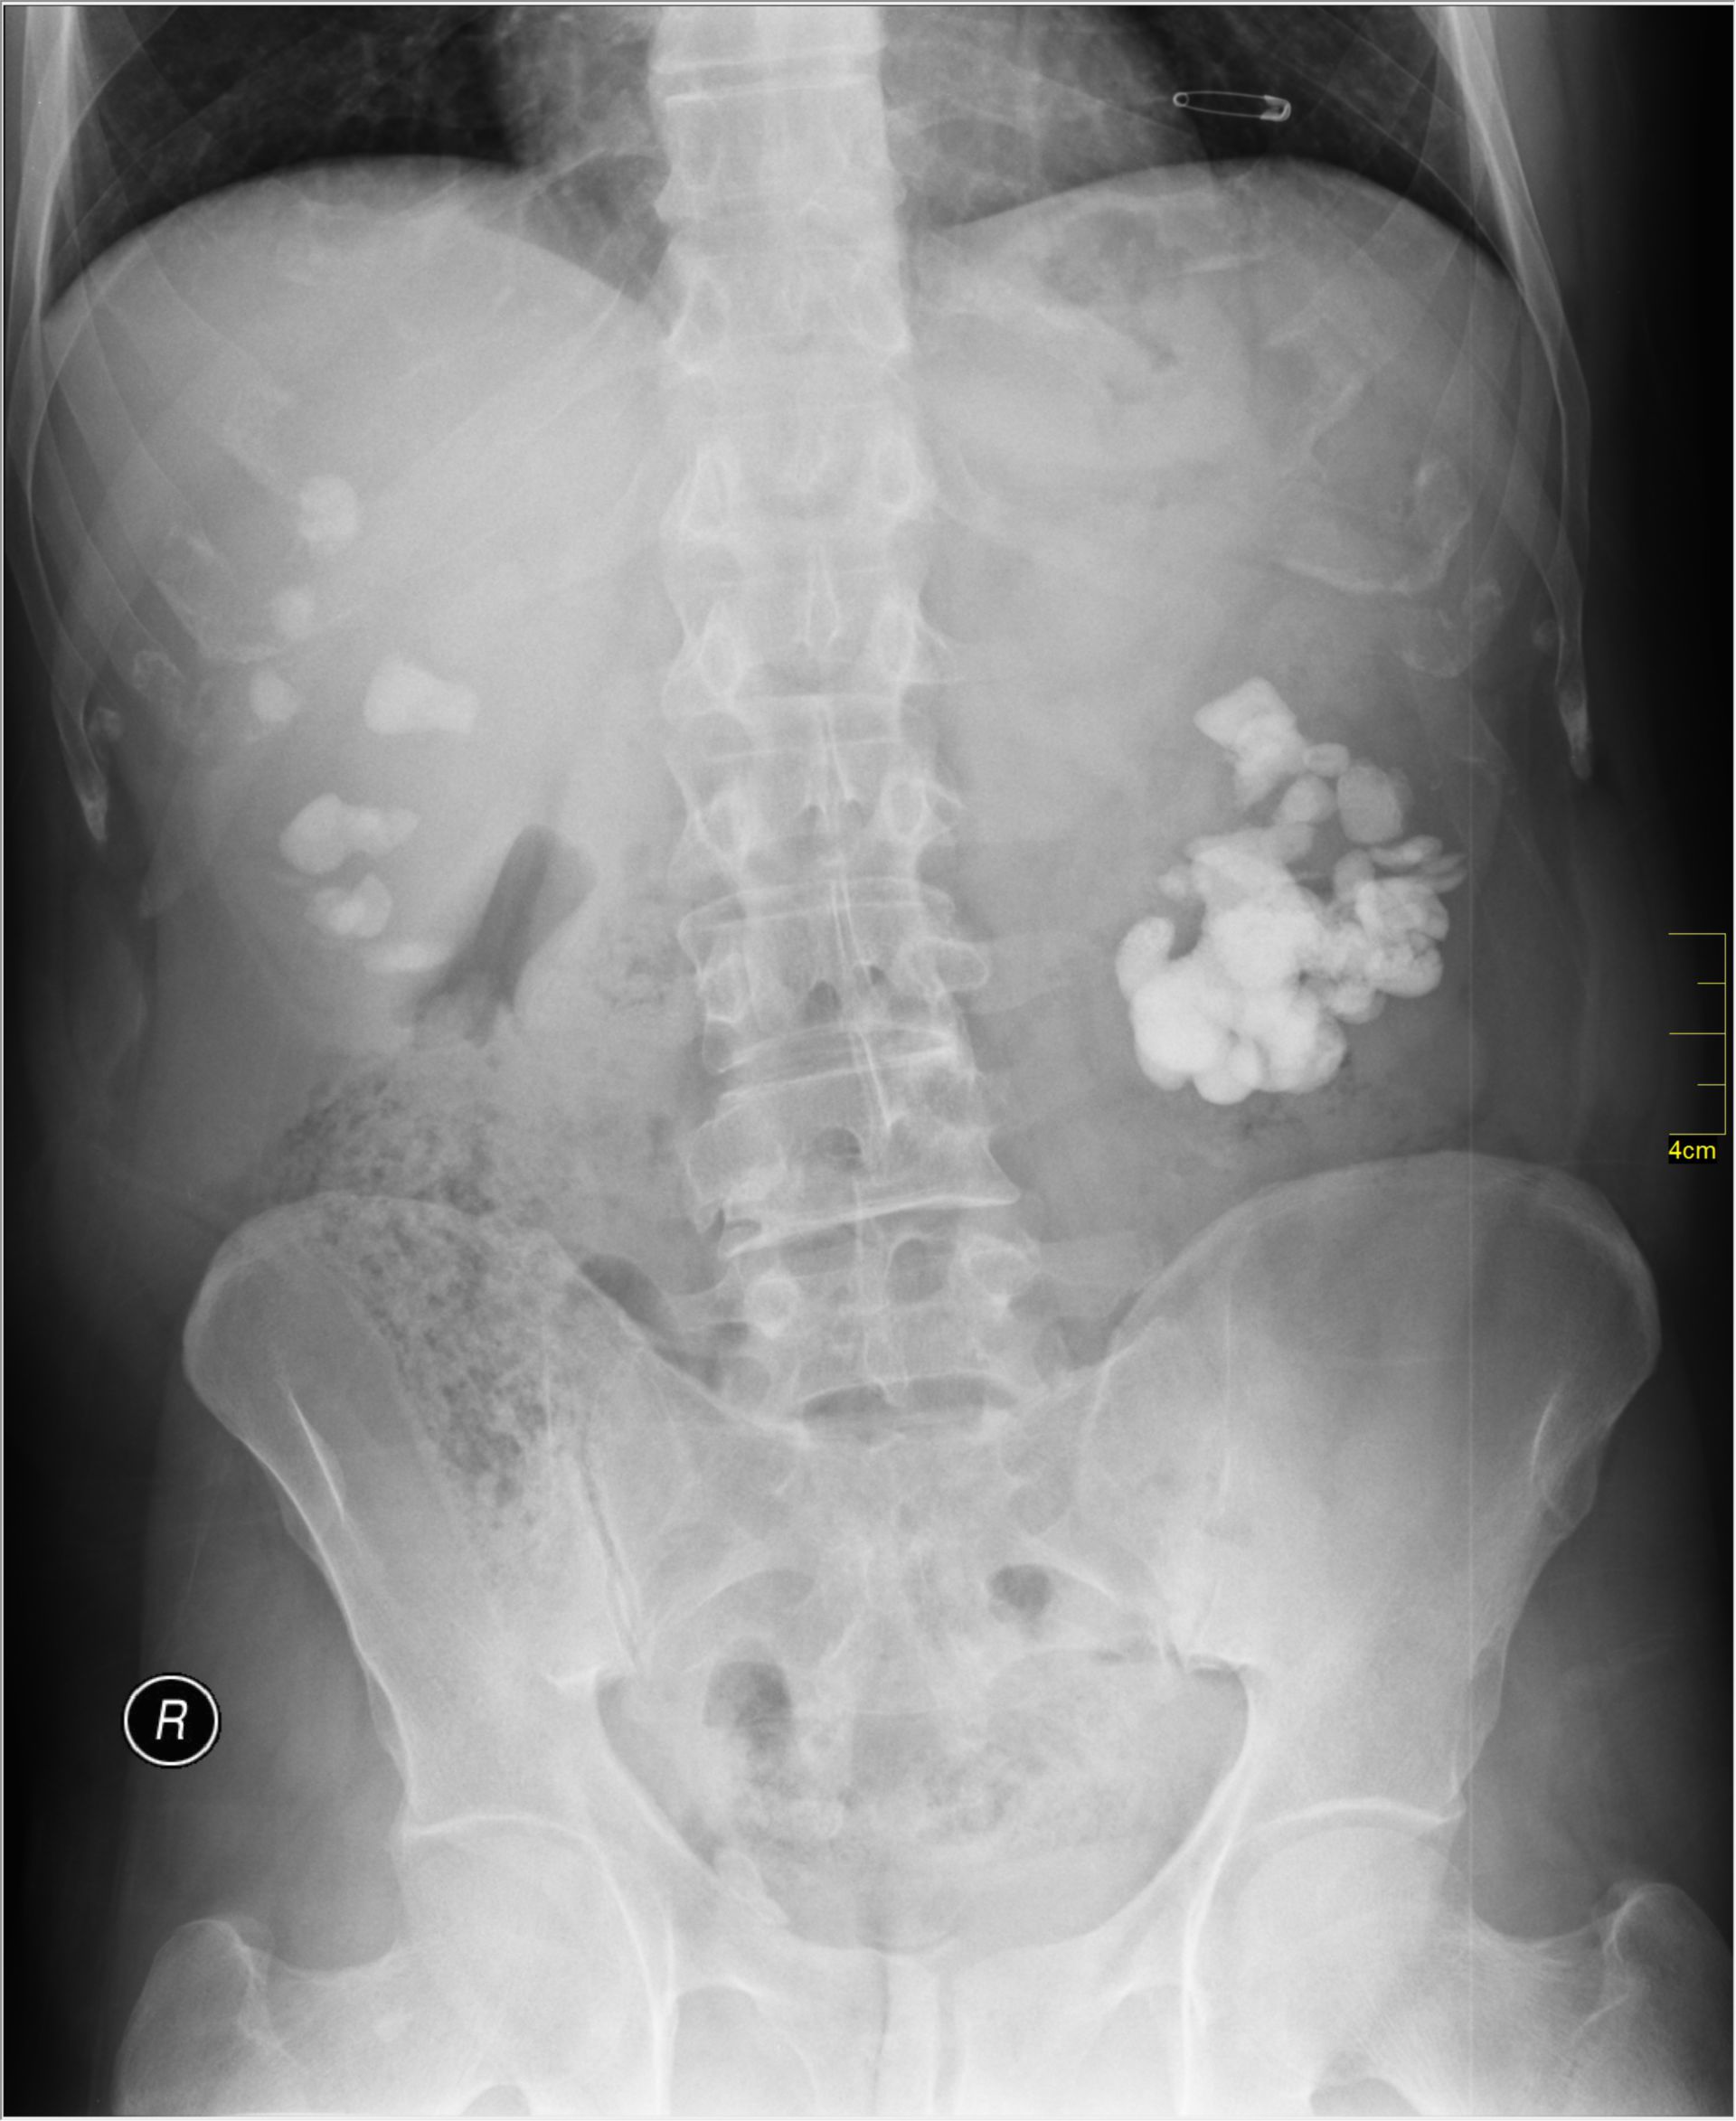 X-ray with bilateral Kidney stones